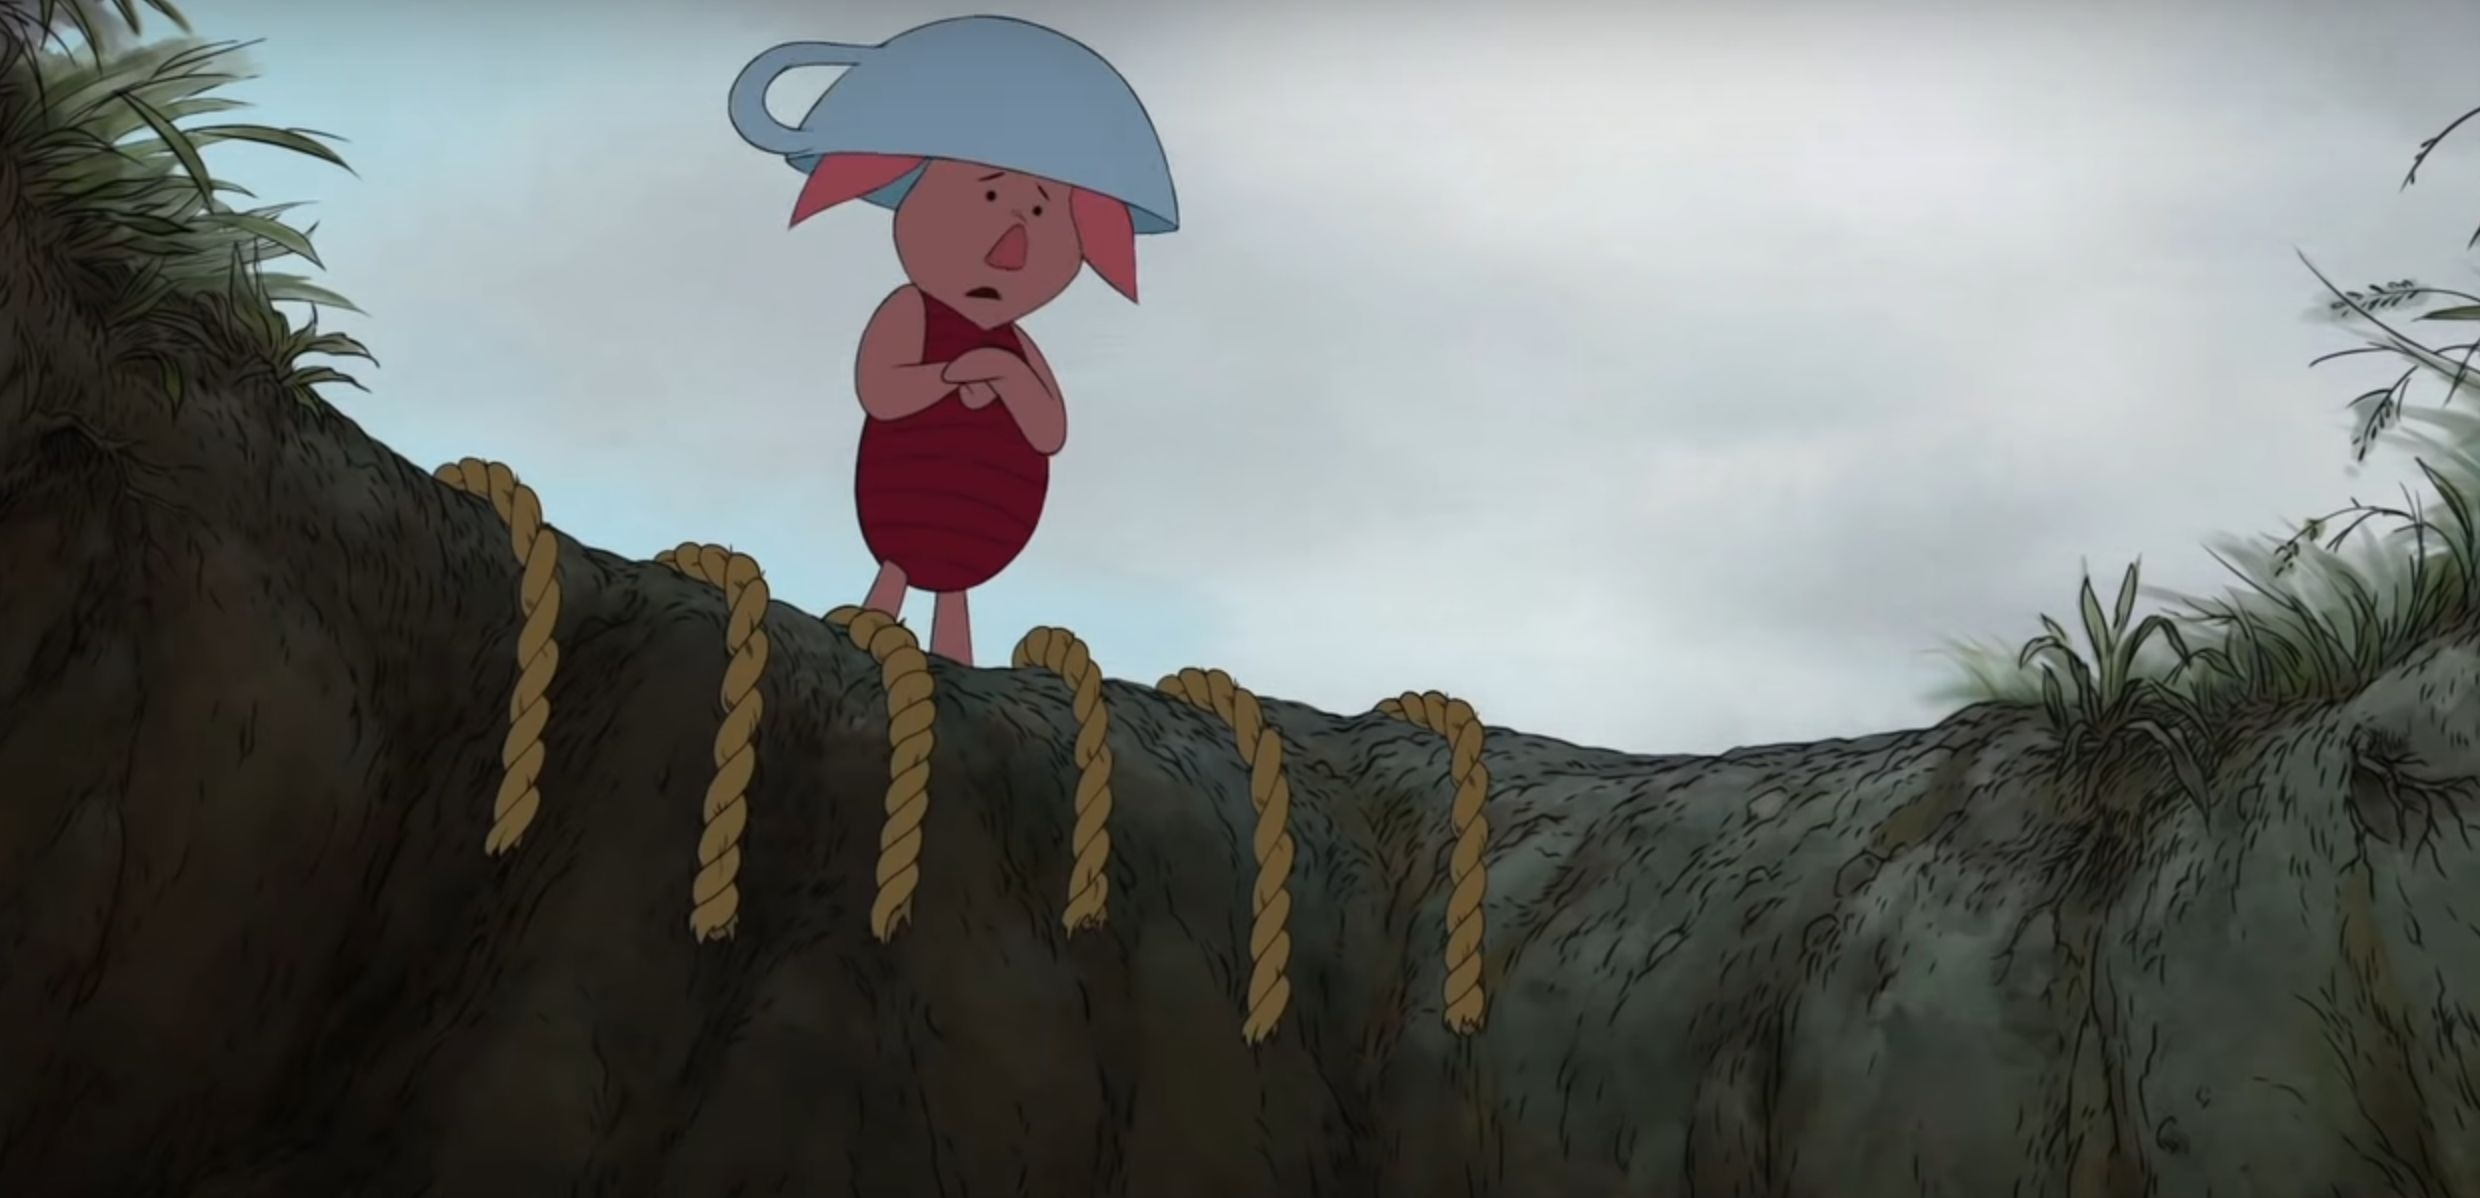 Piglet, Animation, Winnie-the-Pooh, Rescuer character, 2480x1200 Dual Screen Desktop